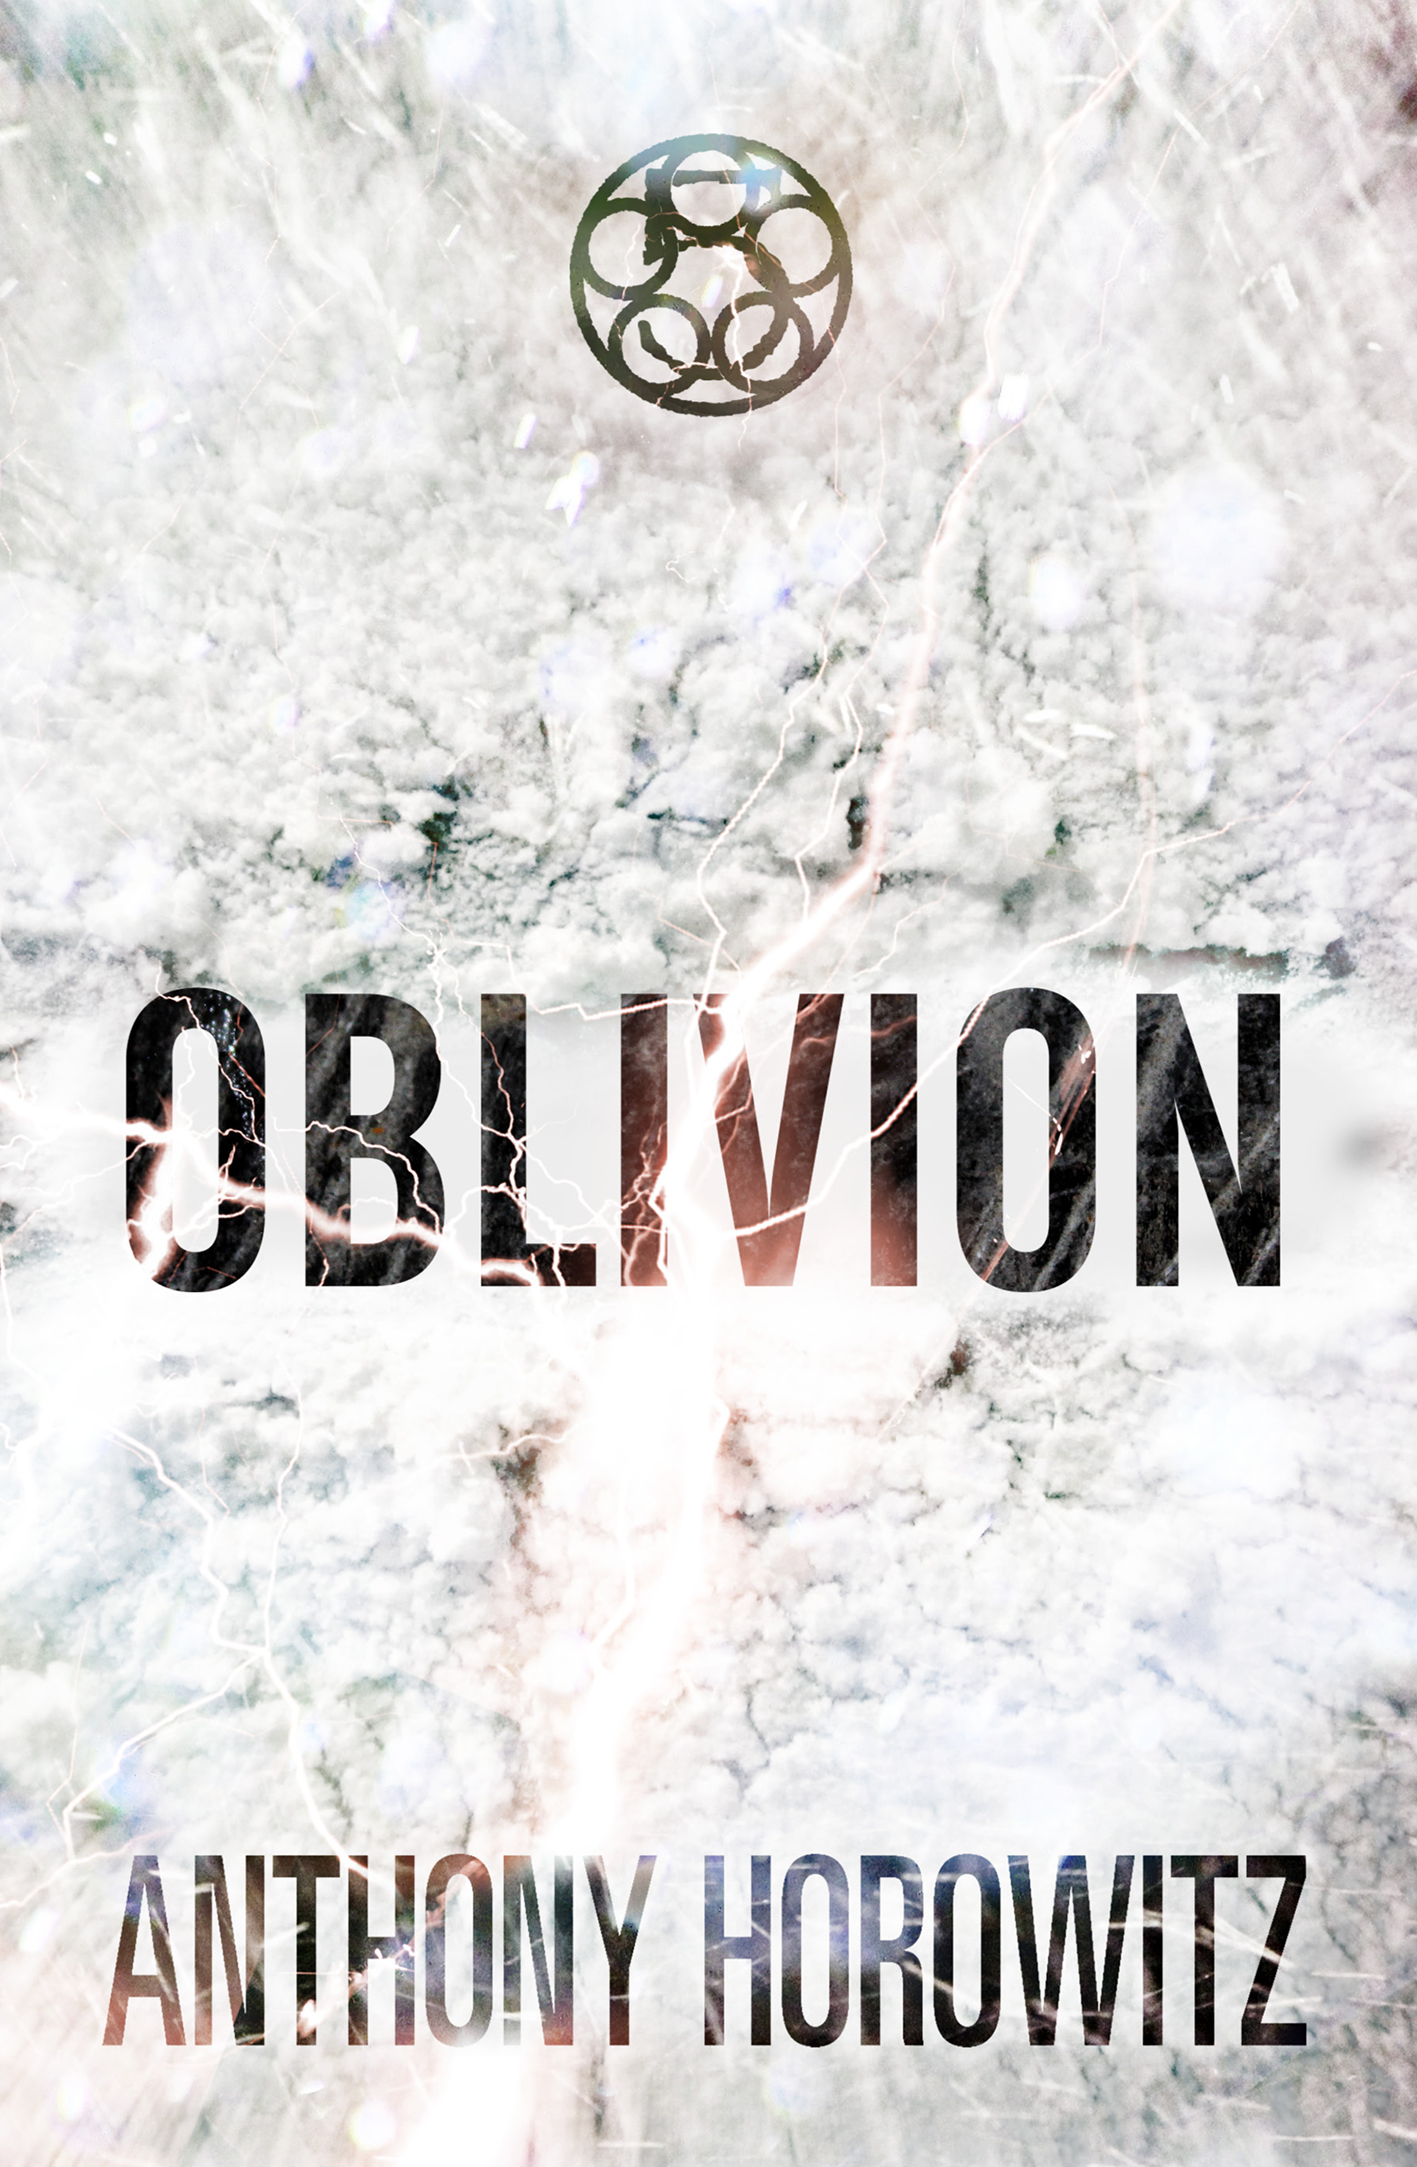 The-Power-of-Five-Oblivion